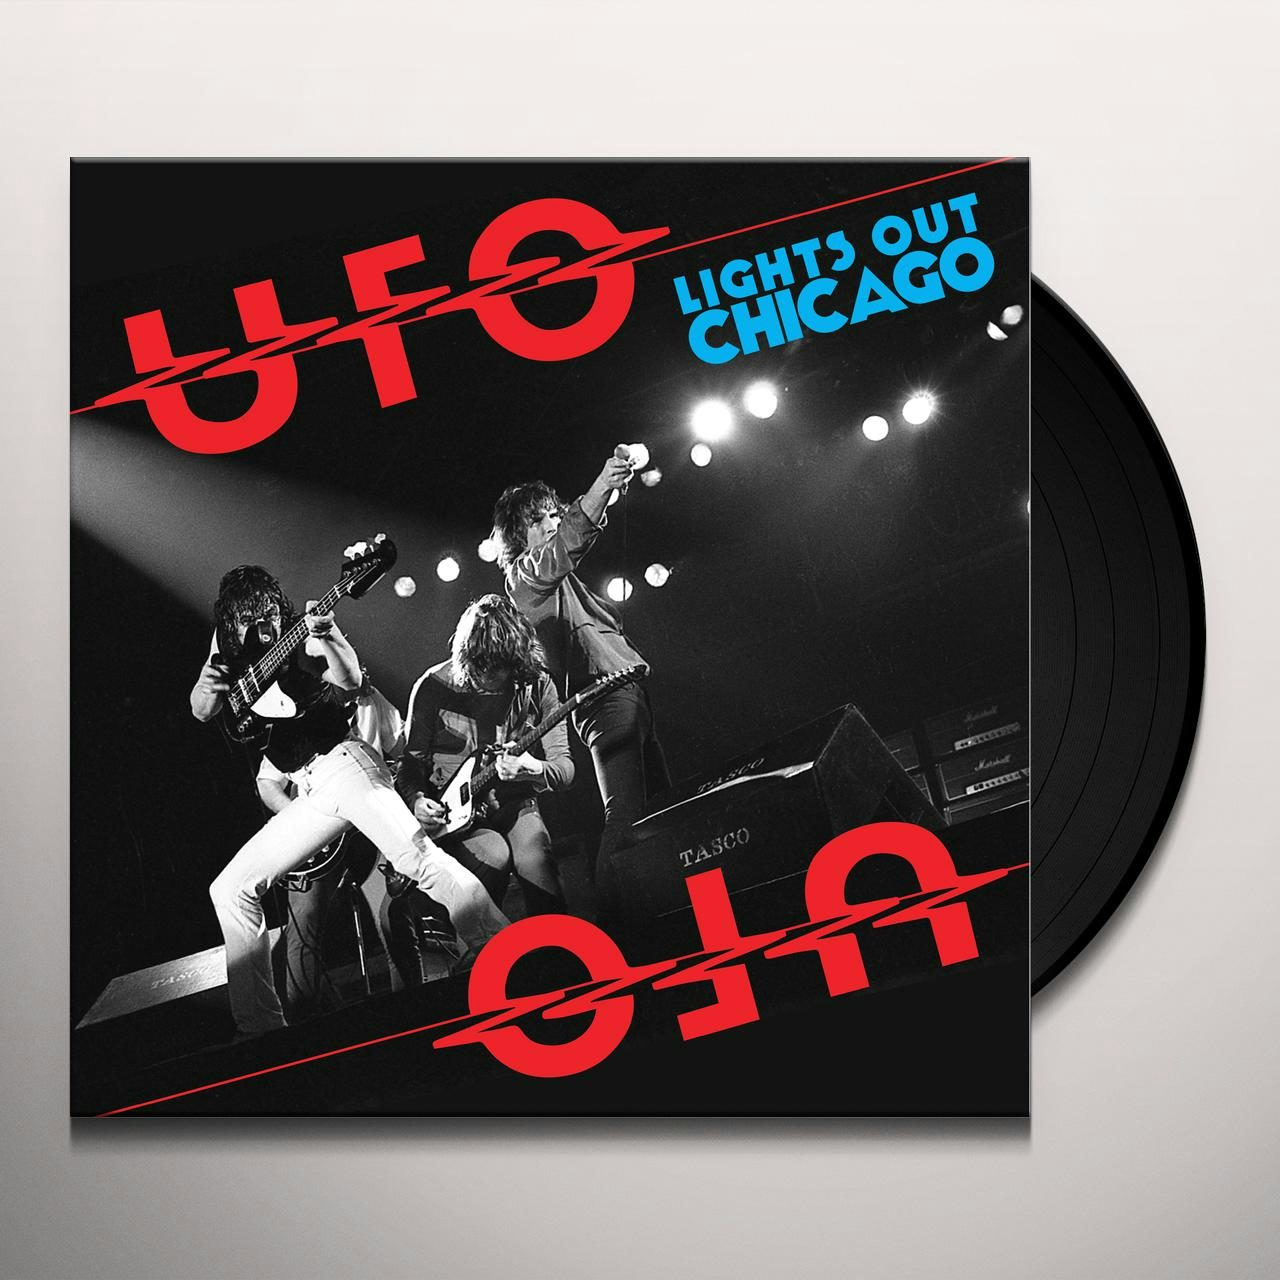 download lights out surviving the 70s with ufo